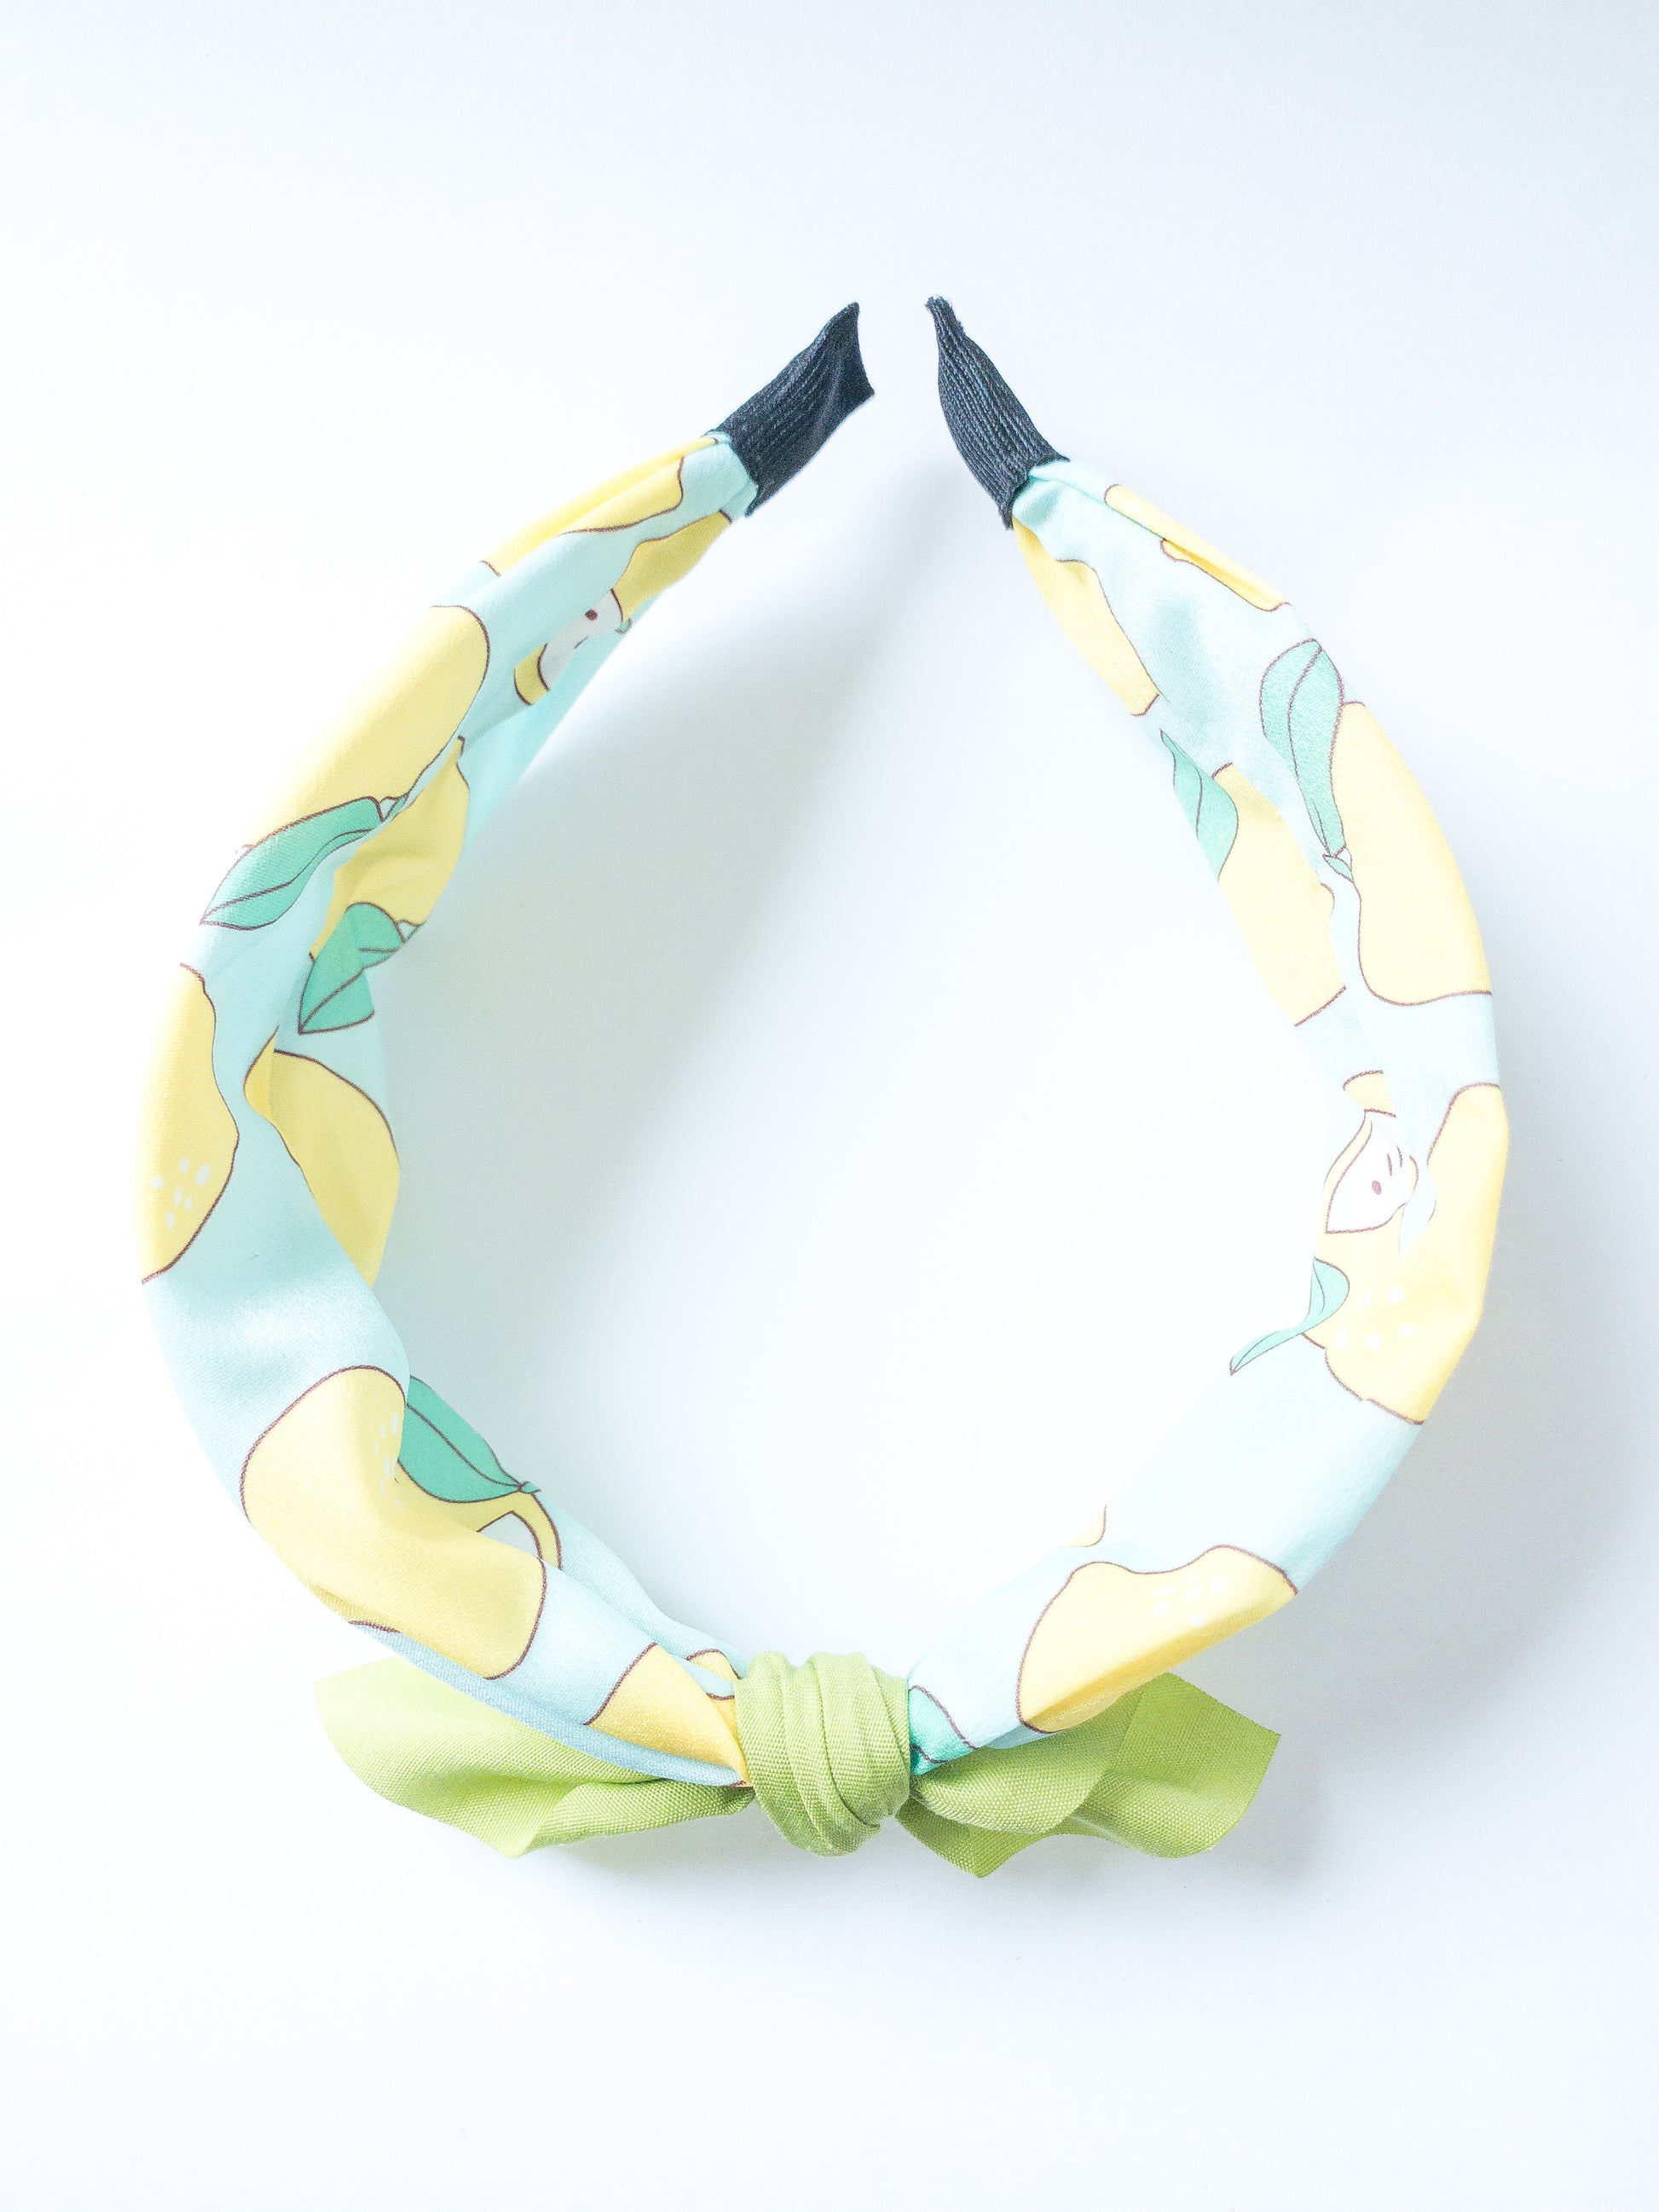 Not only is this headband so so cute, but it is also very comfortable! Each headband is wrapped in a silky fruit patterned fabric with a solid color bow at the top. The ends are also wrapped in fabric. Choose from four different fruits/colors. Best suited for a child.